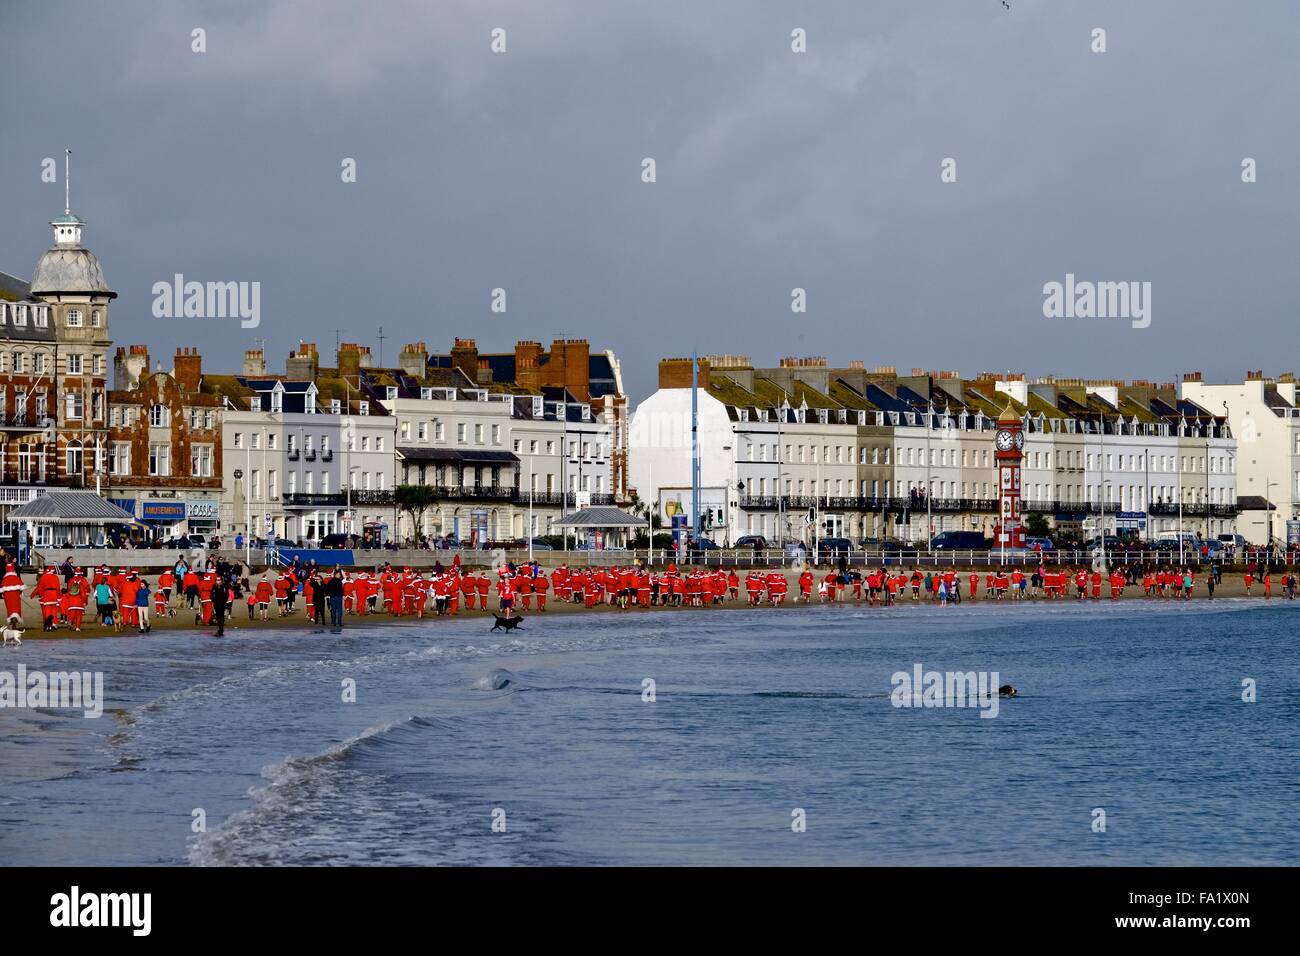 Weymouth, Dorset, UK. 20th Dec 2015. Hundreds of Santas race across Weymouth beach in spring like temperatures taking part in the Christmas Pudding race. The 5k annual charity race started when over 200 Santas chased the Weymouth Panto star Nurse Nellie (played by Lee Redwood) along Weymouth's famous beach Credit:  Tom Corban/Alamy Live News Stock Photo